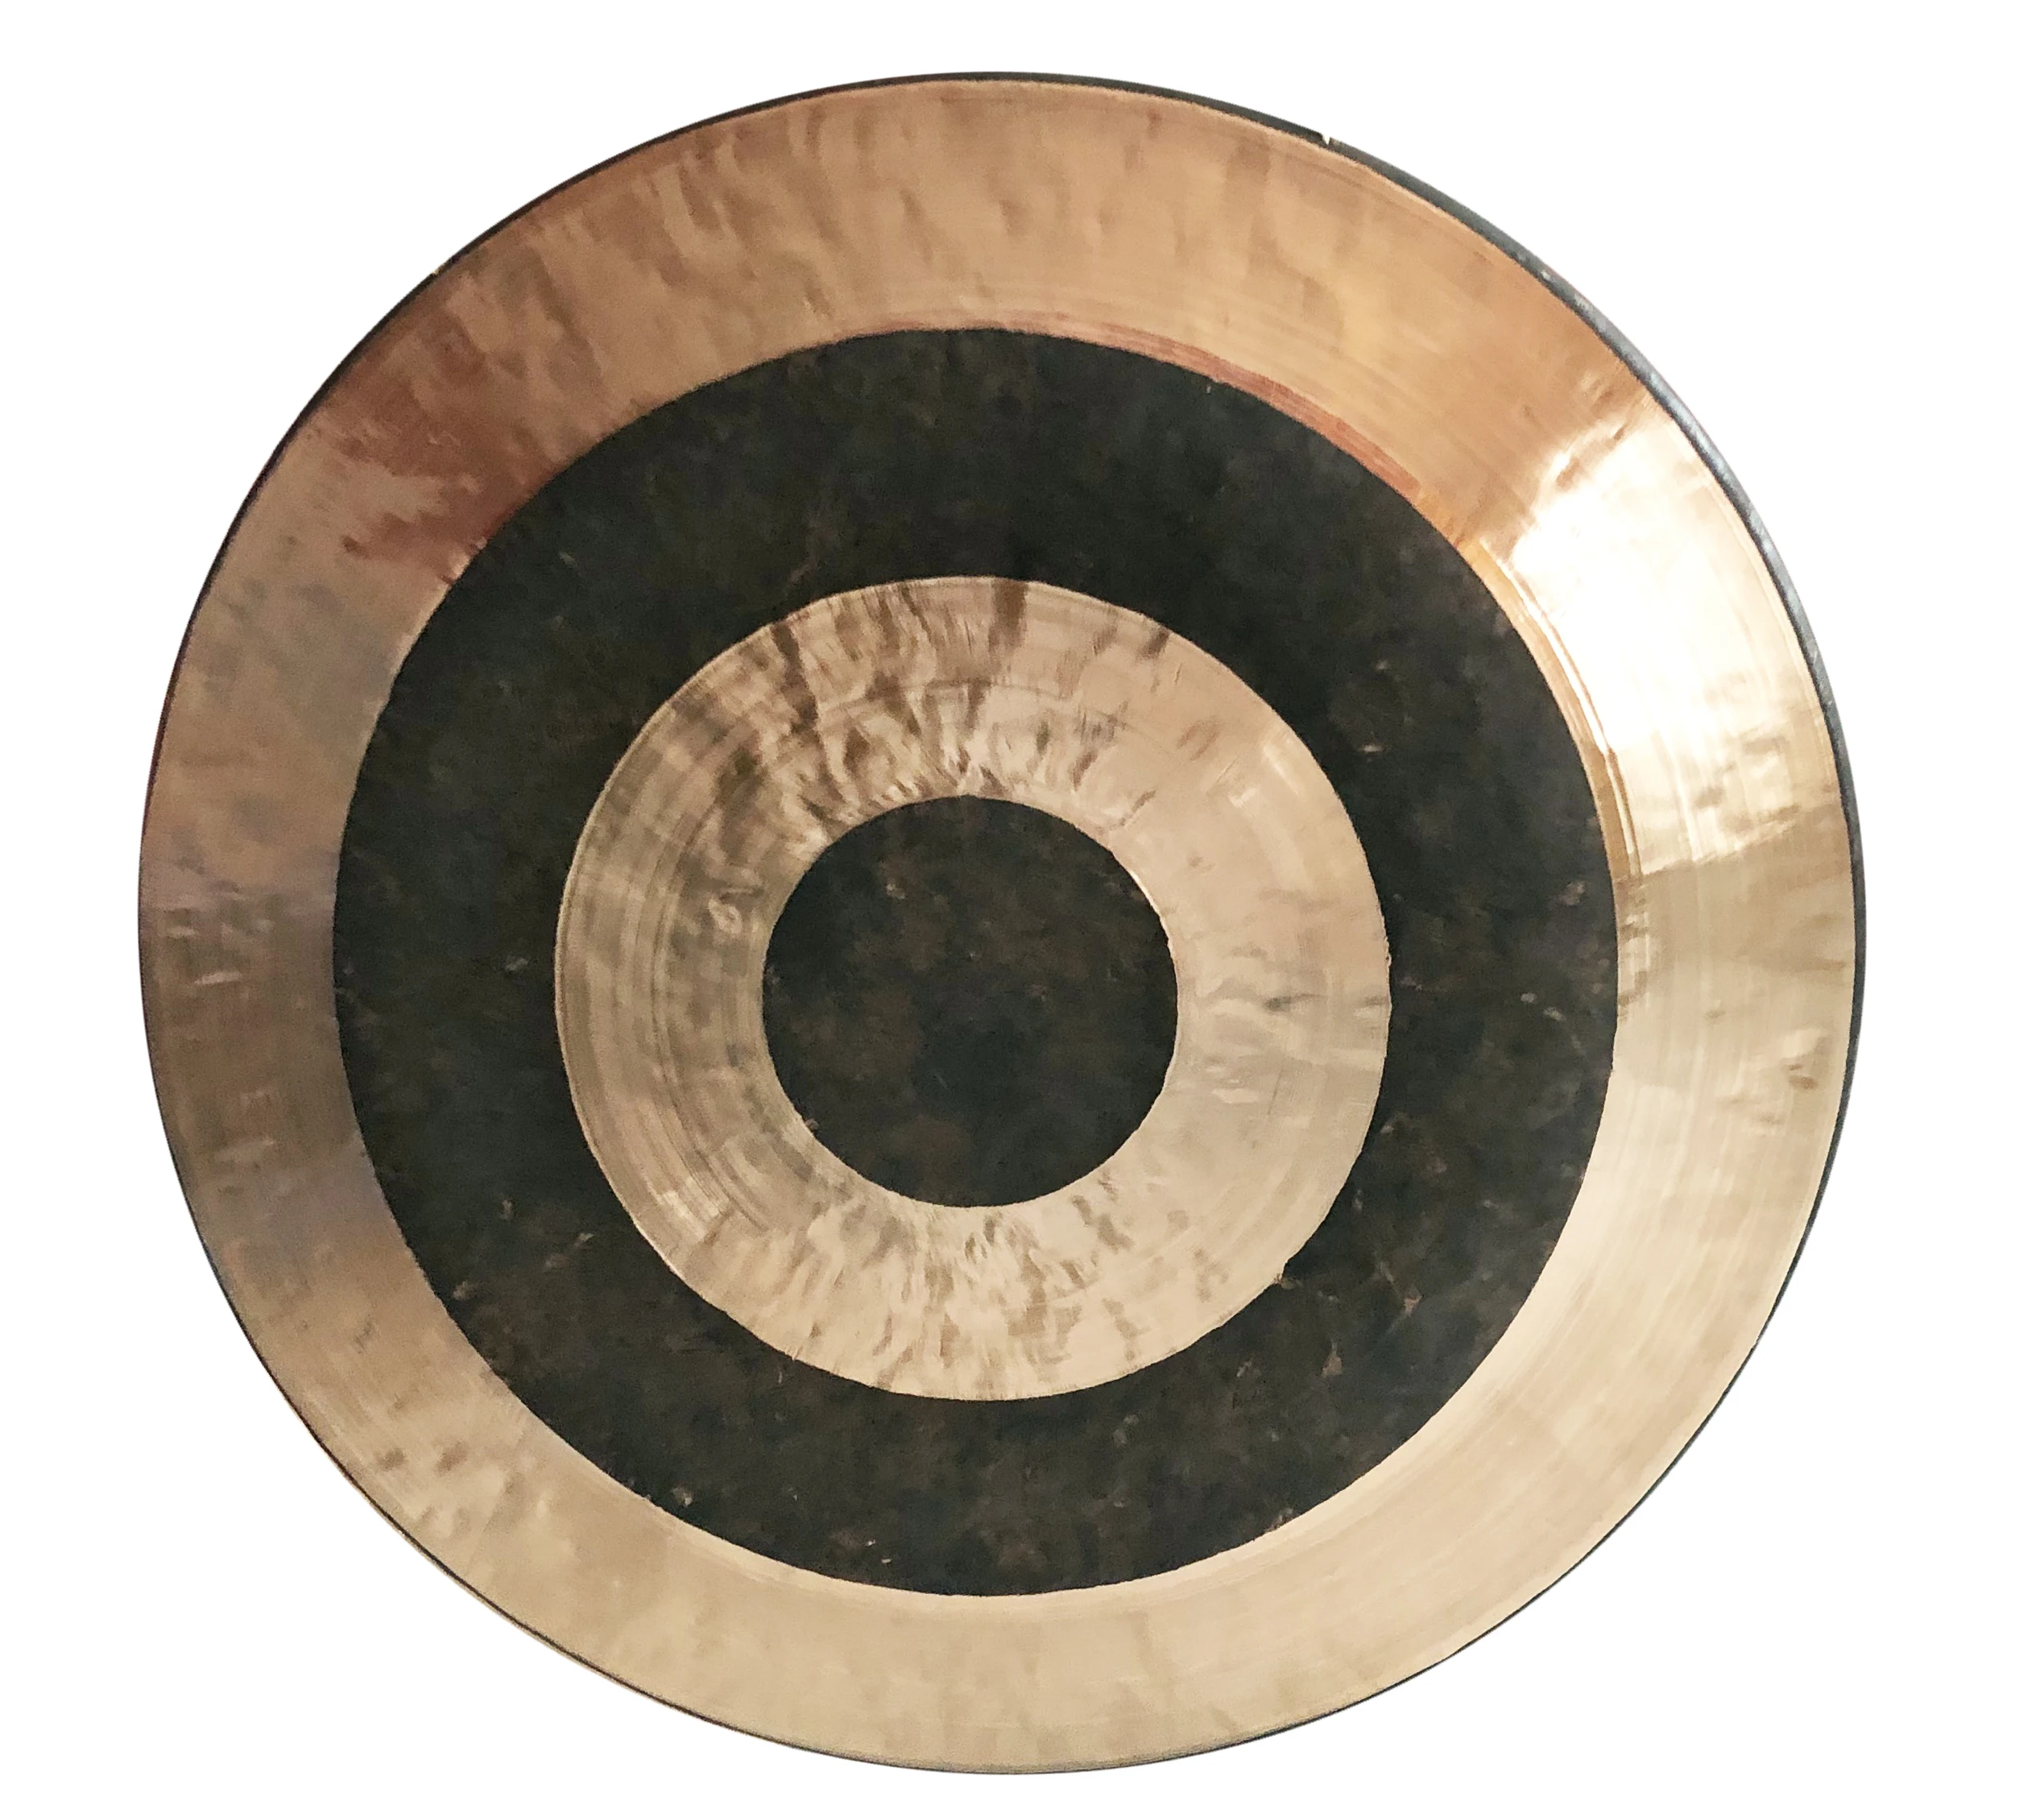 

Arborea unified Wind gong 45 cm Gong 18' is the first choice for sound therapy 100% handmade gong made in china without stand